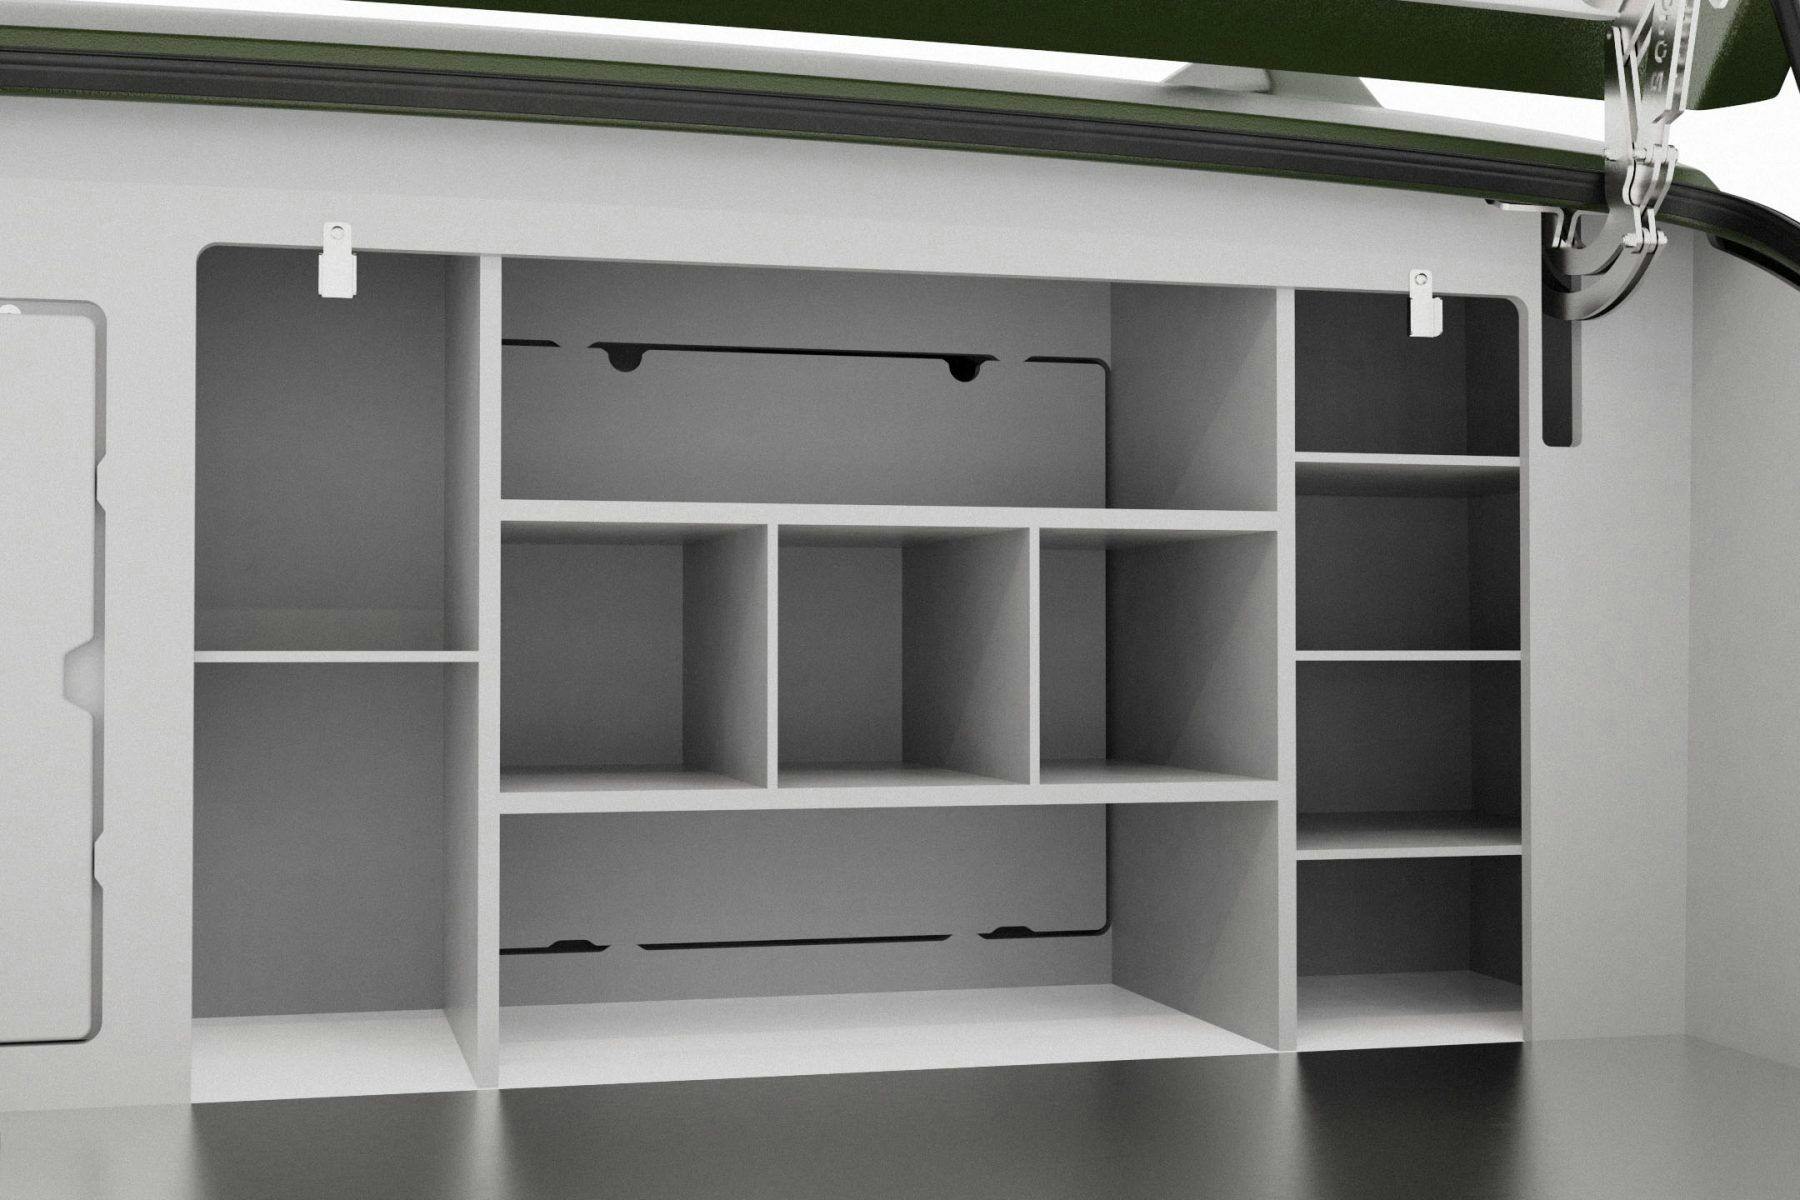 Rendering of the modular shelving in the galley of the TOPO2, an adventure trailer.